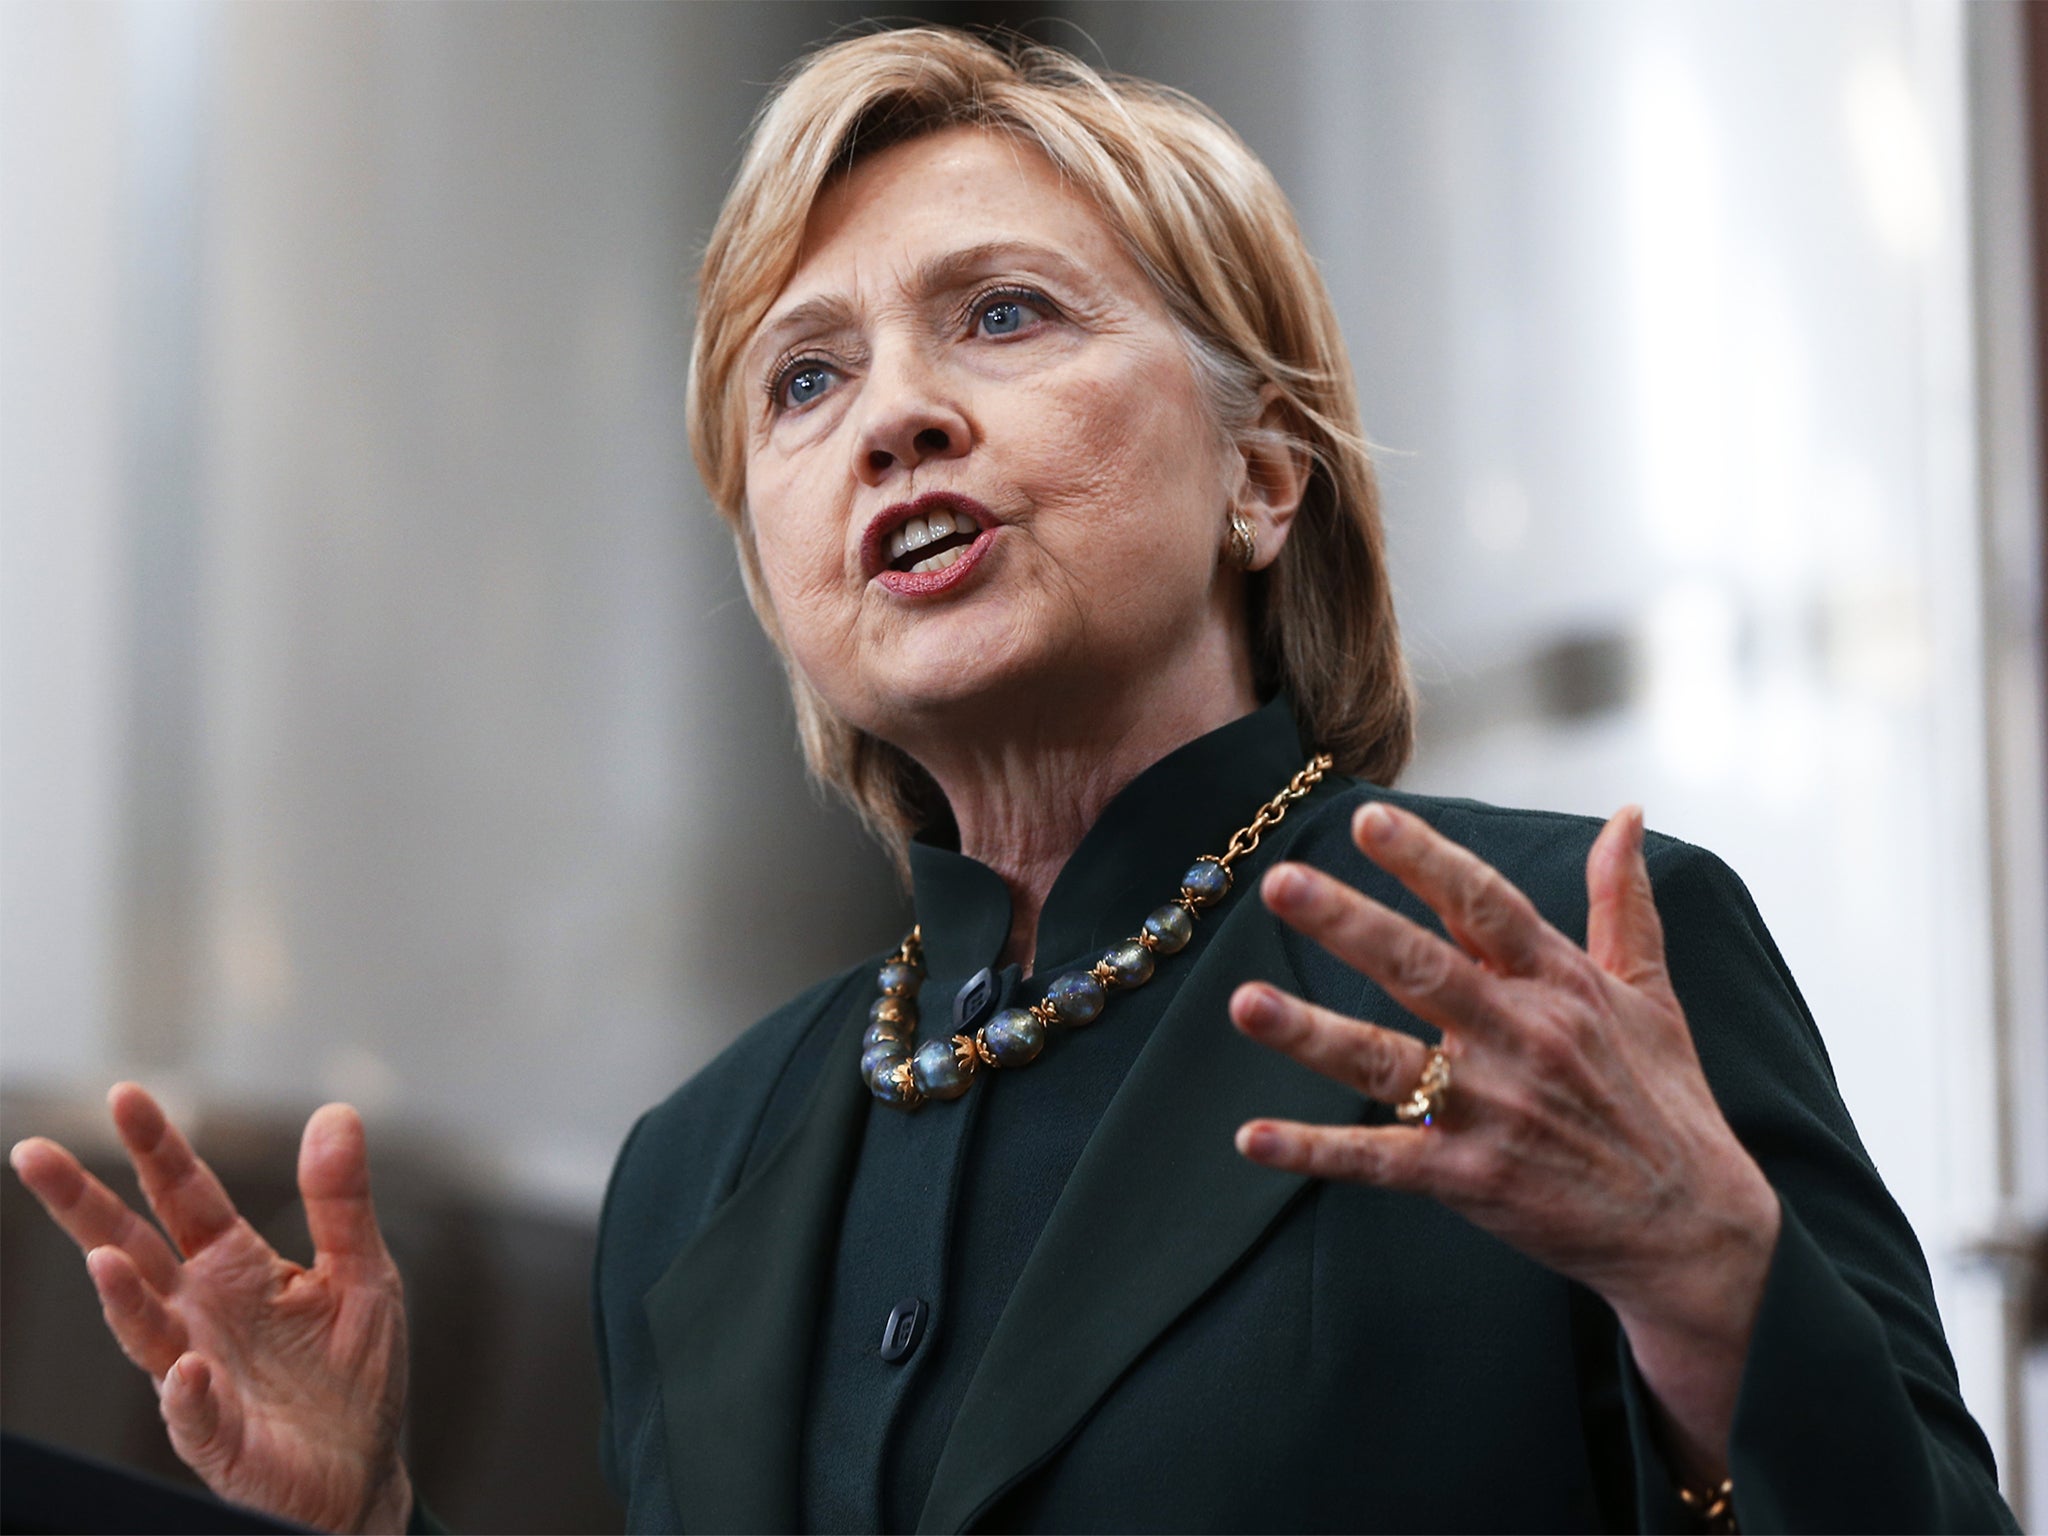 Hillary Clinton plans to campaign in California this week